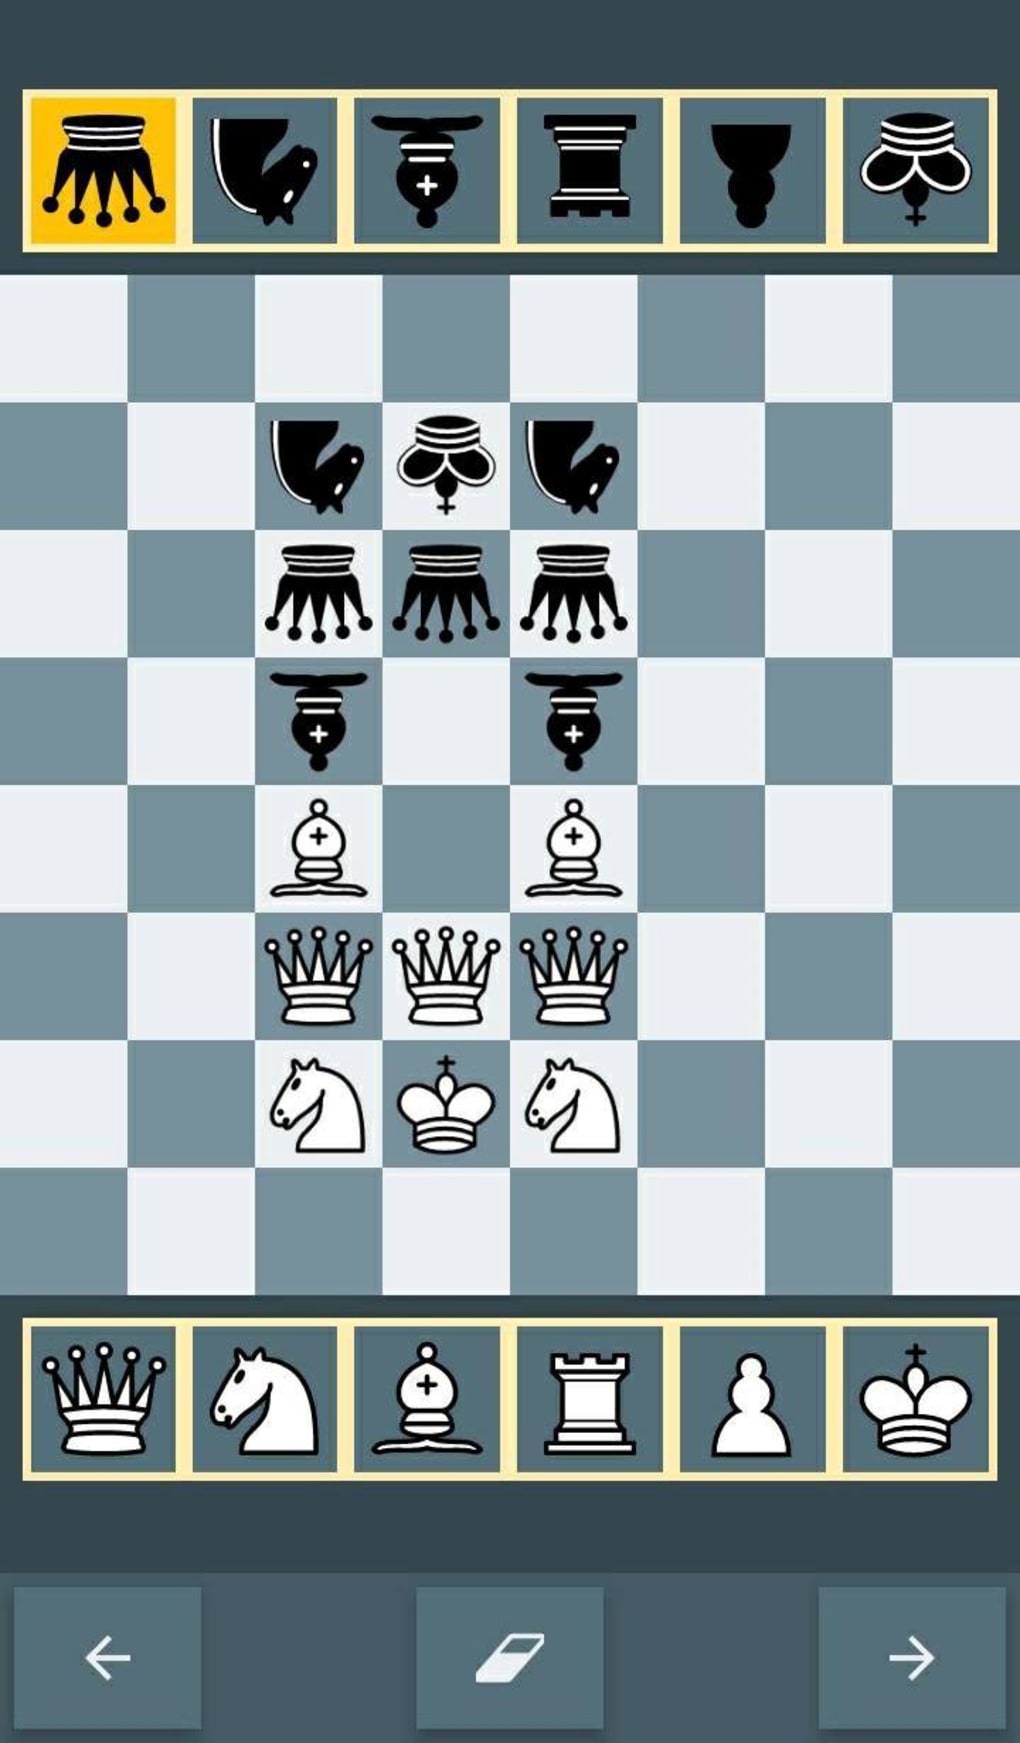 Chess - Offline Board Game - Apps on Google Play